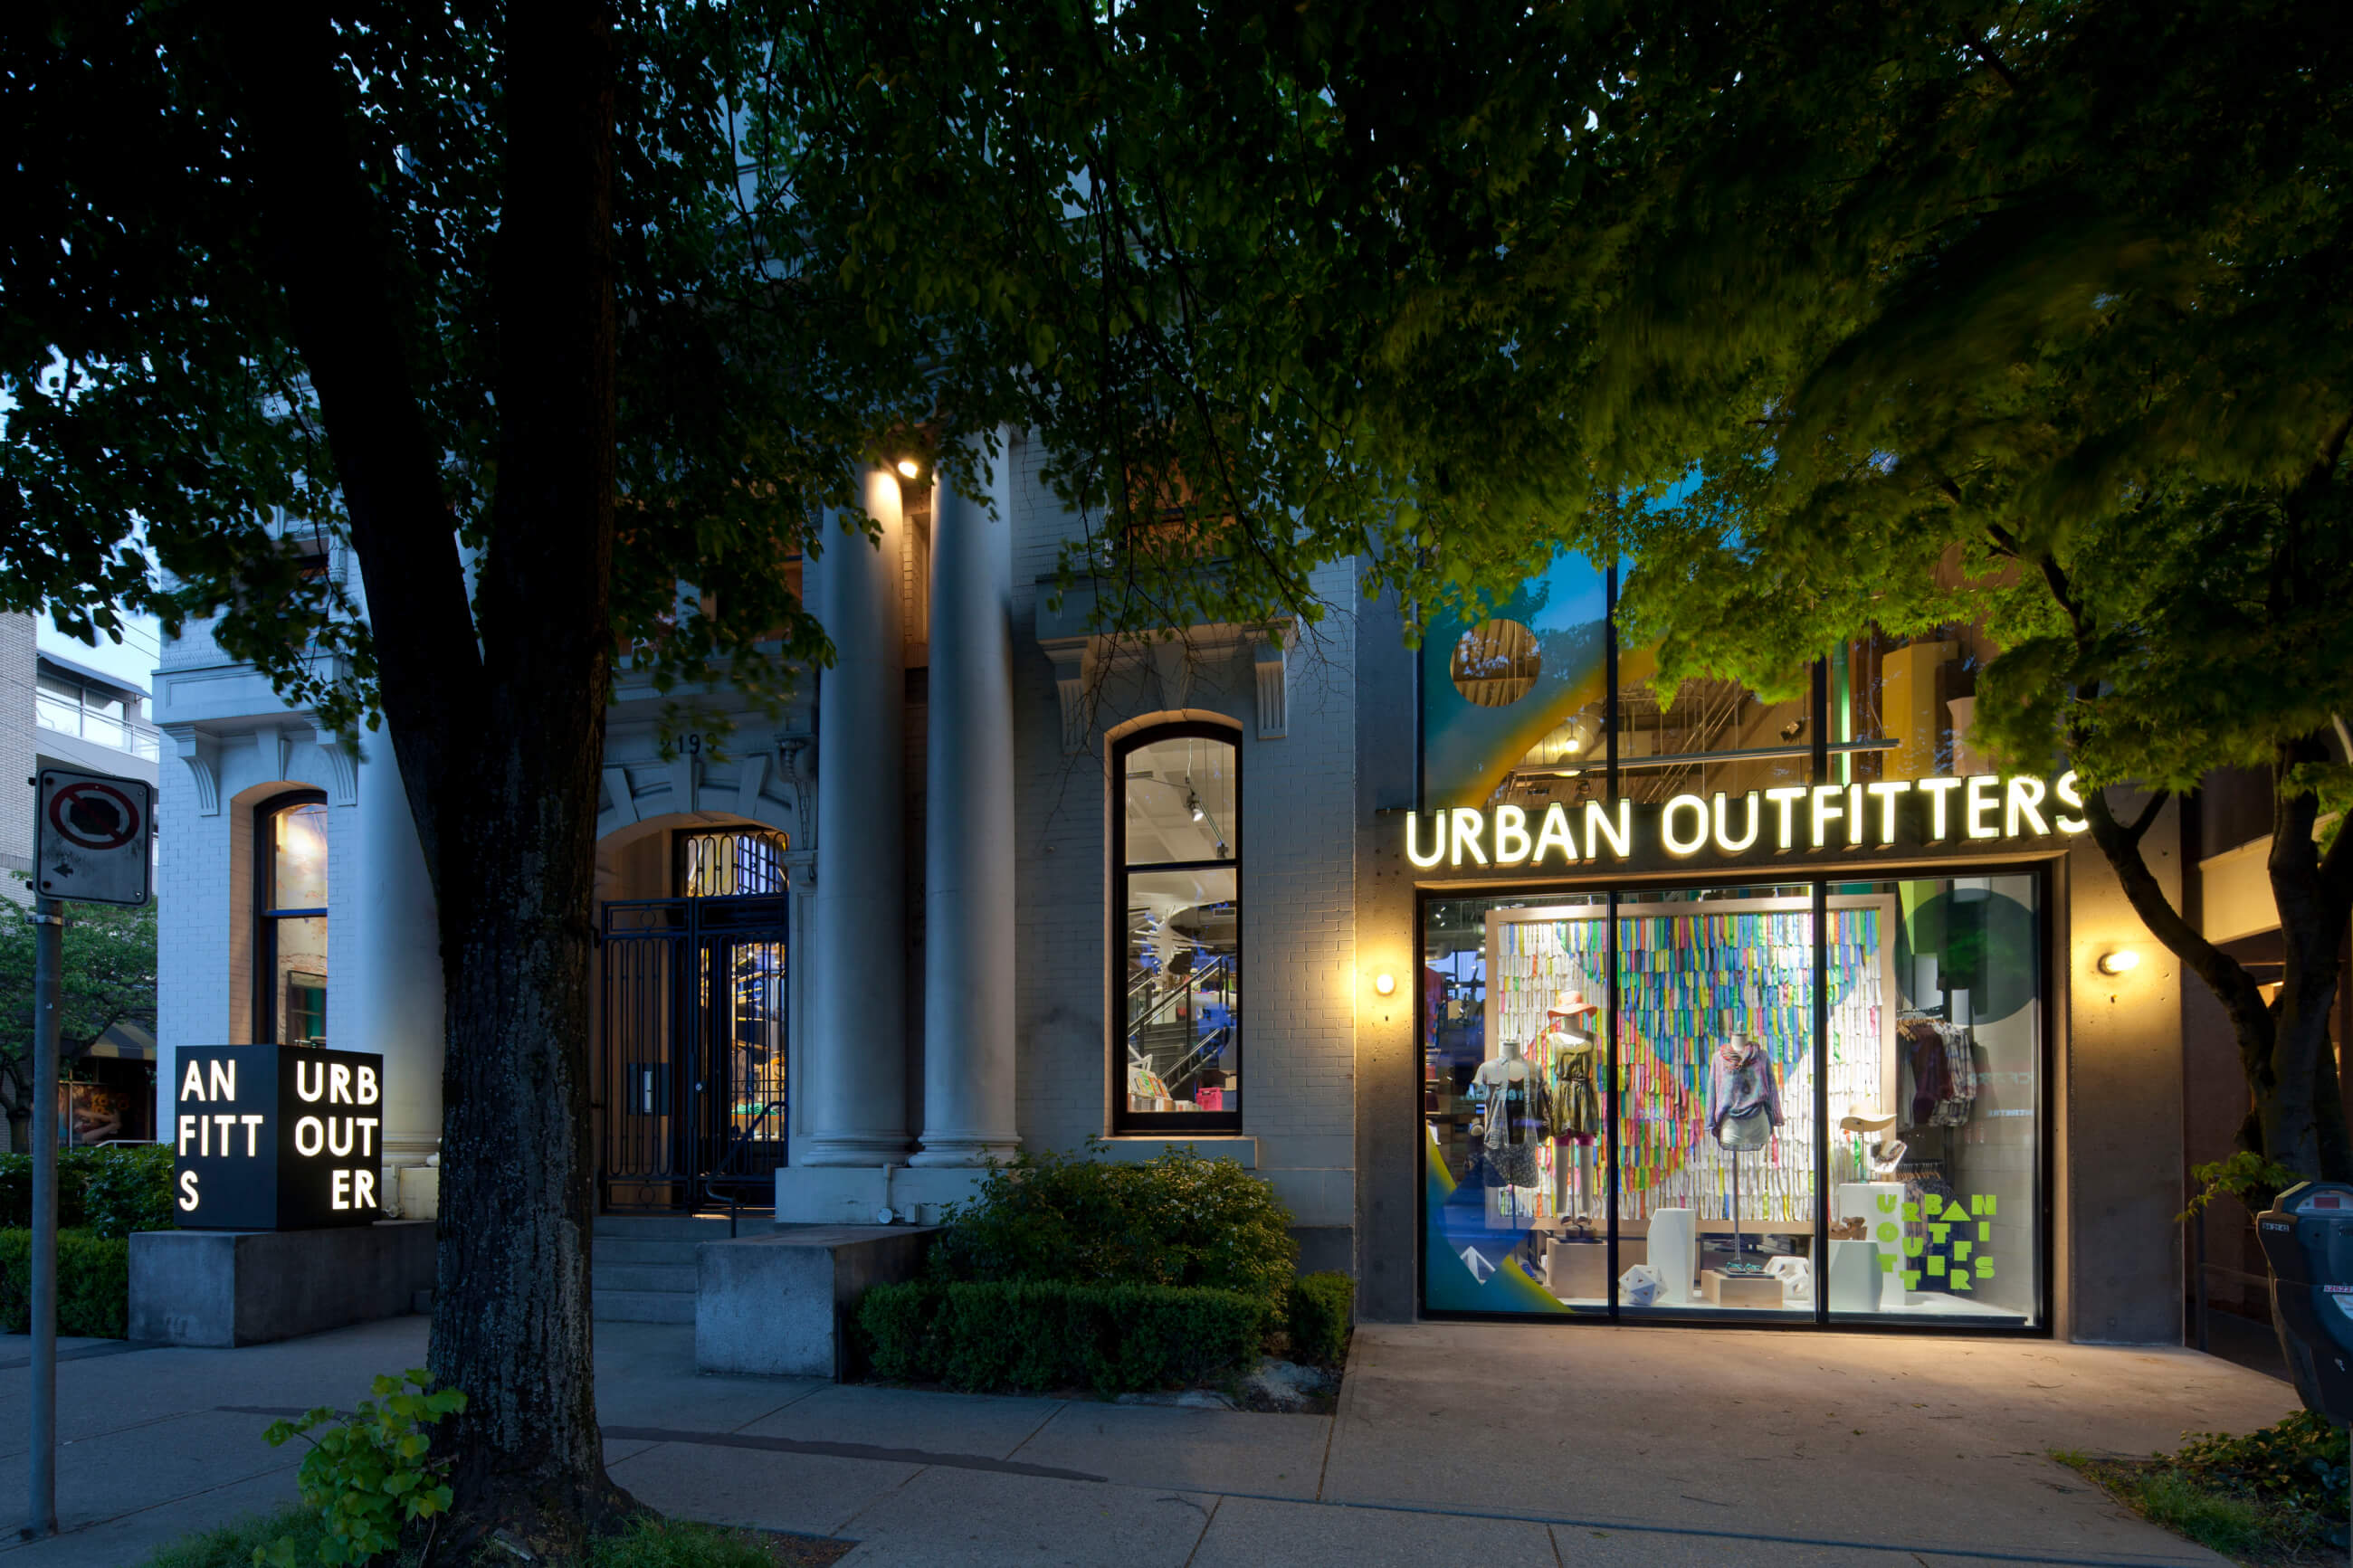 Urban Outfitters - The Lighting Practice